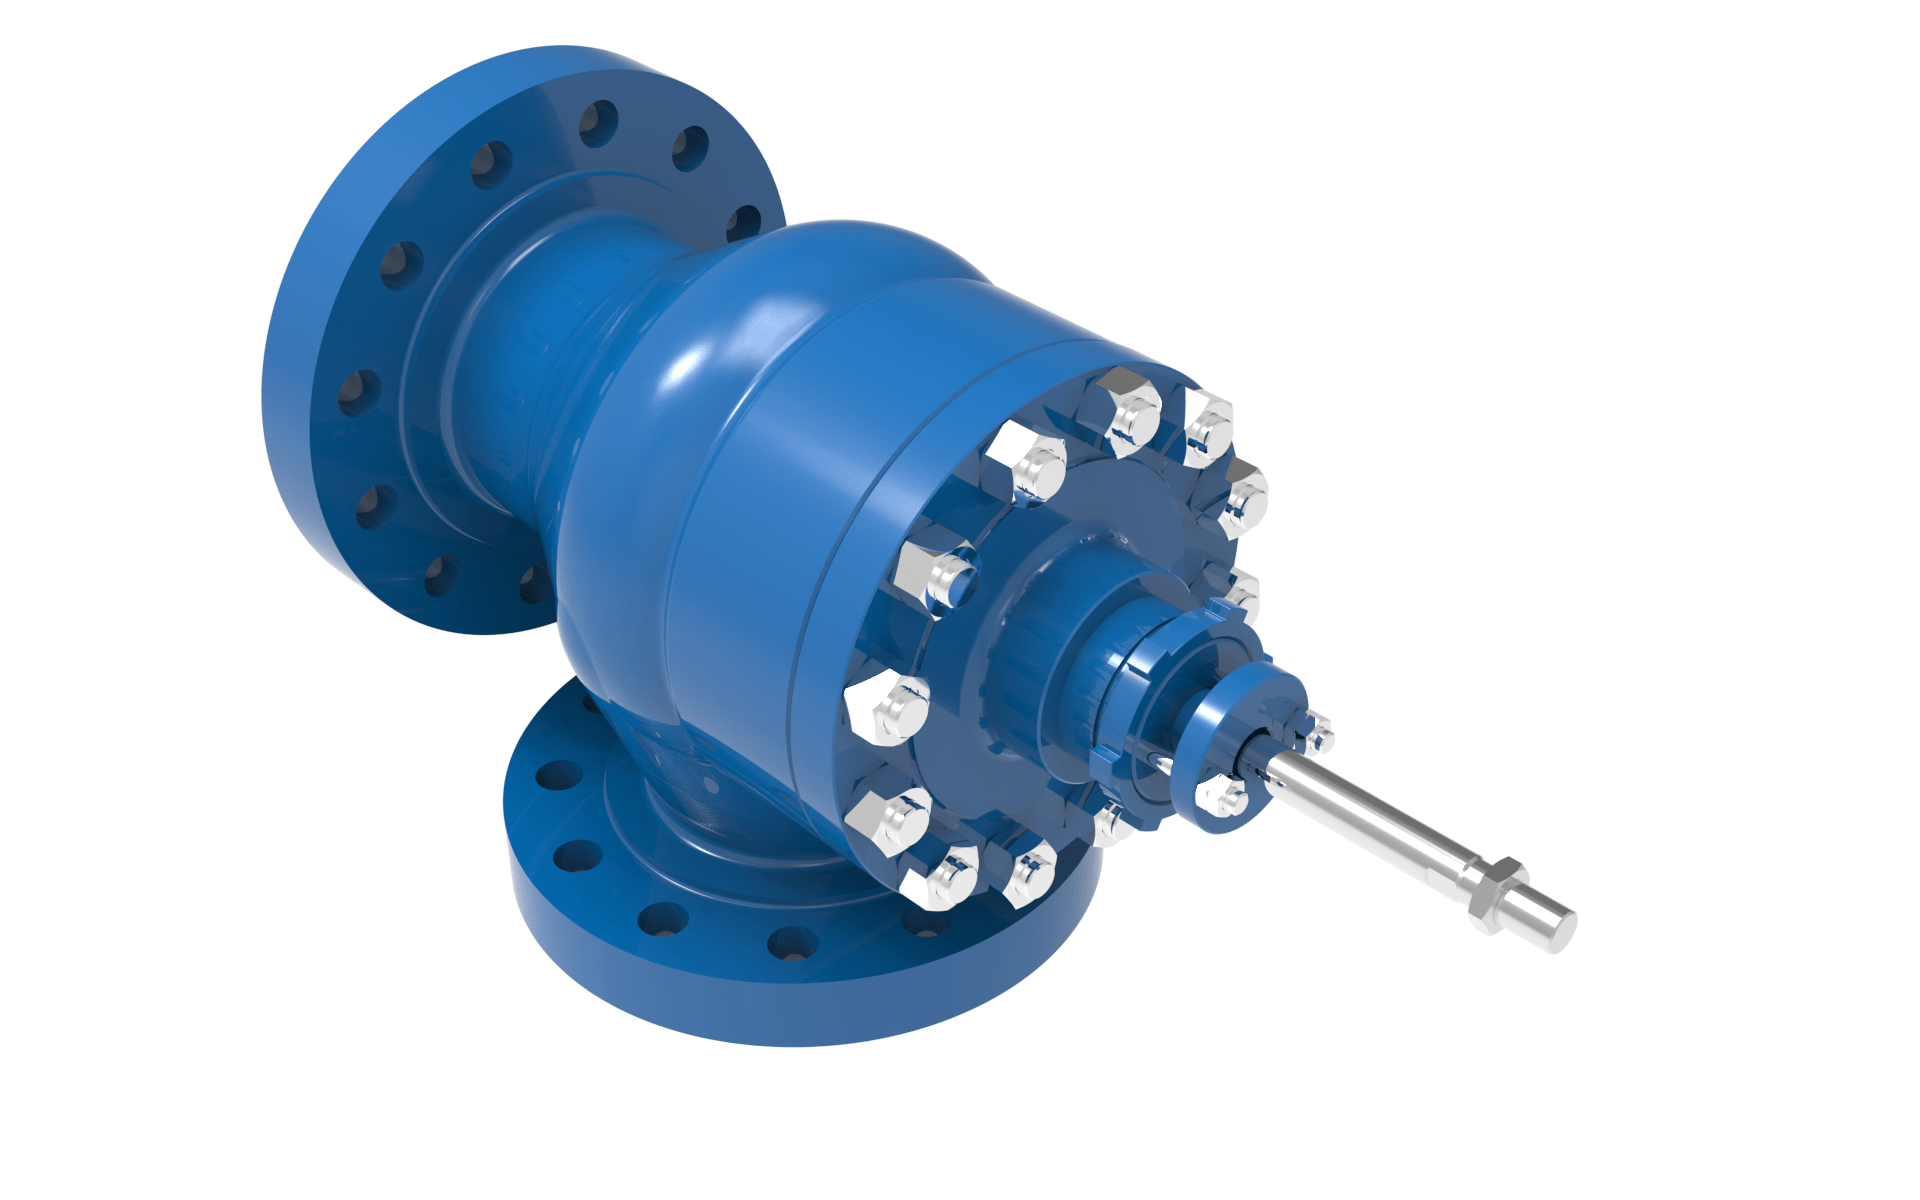 BLAKEBOROUGH® BV501 CAGE TRIM VALVES UP TO CLASS 600LB RATING right angled view